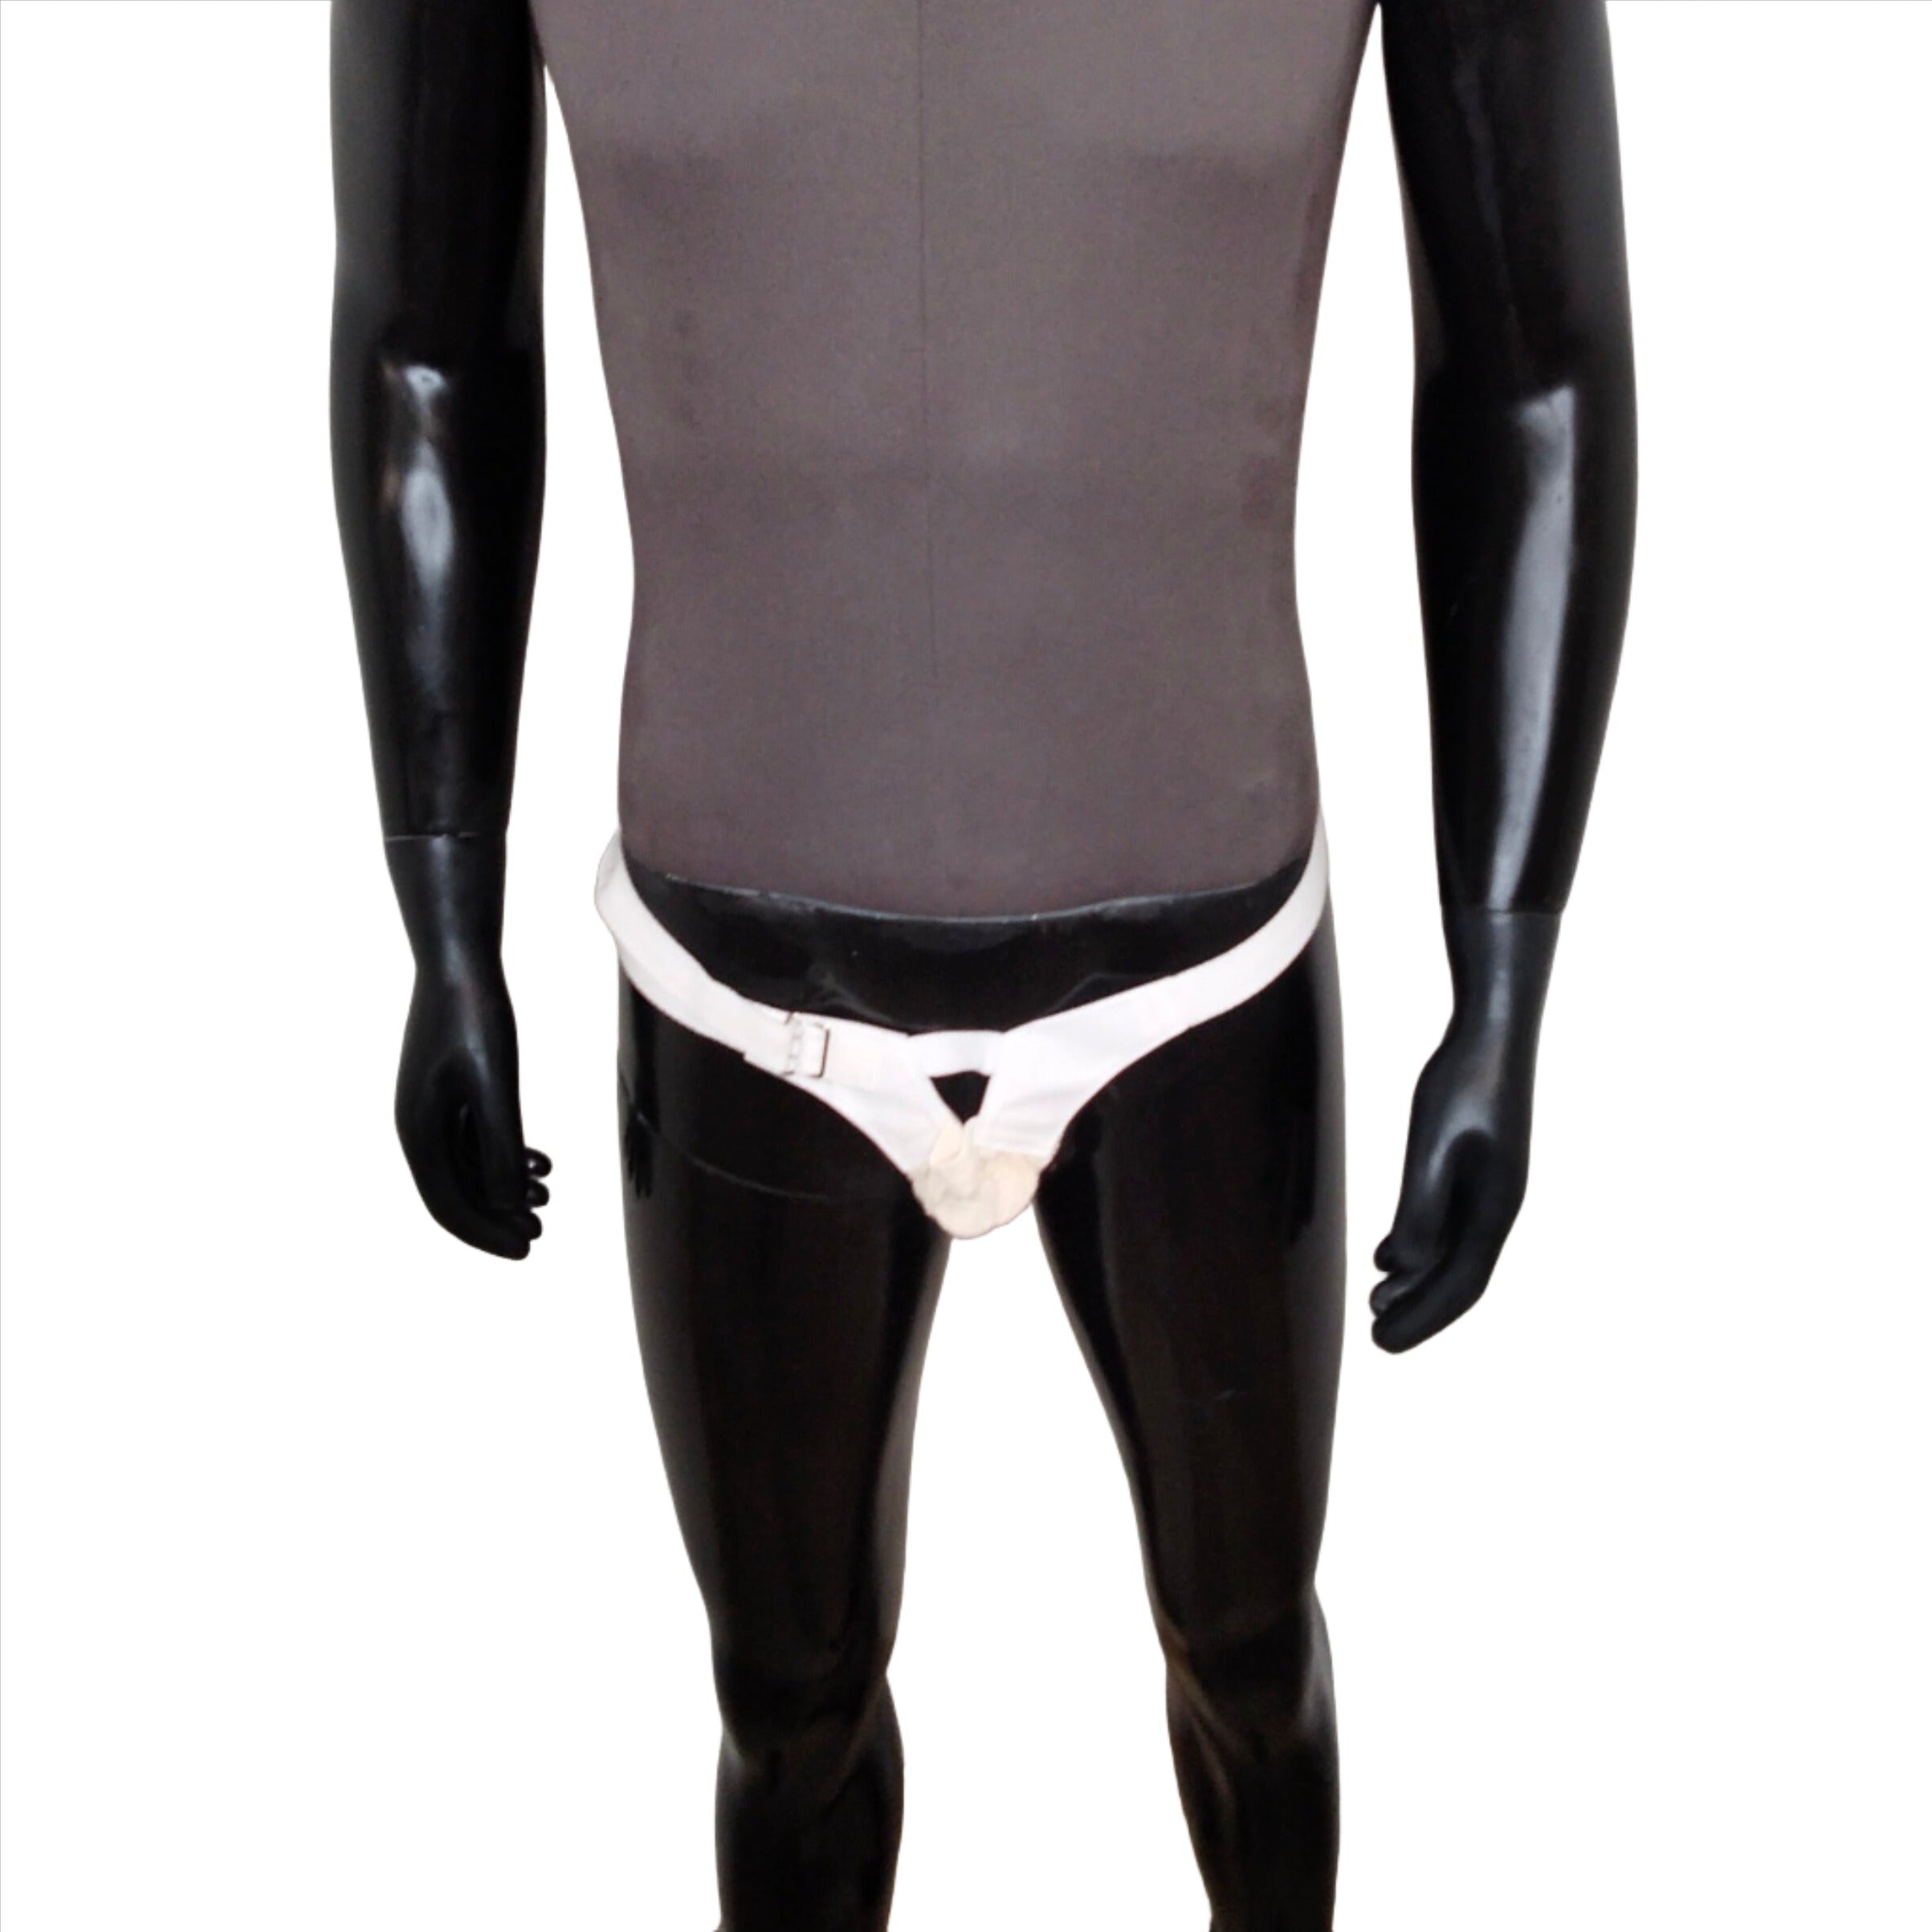 Type 2 Scrotal Support Suspensory Bandage - Discontinued Line